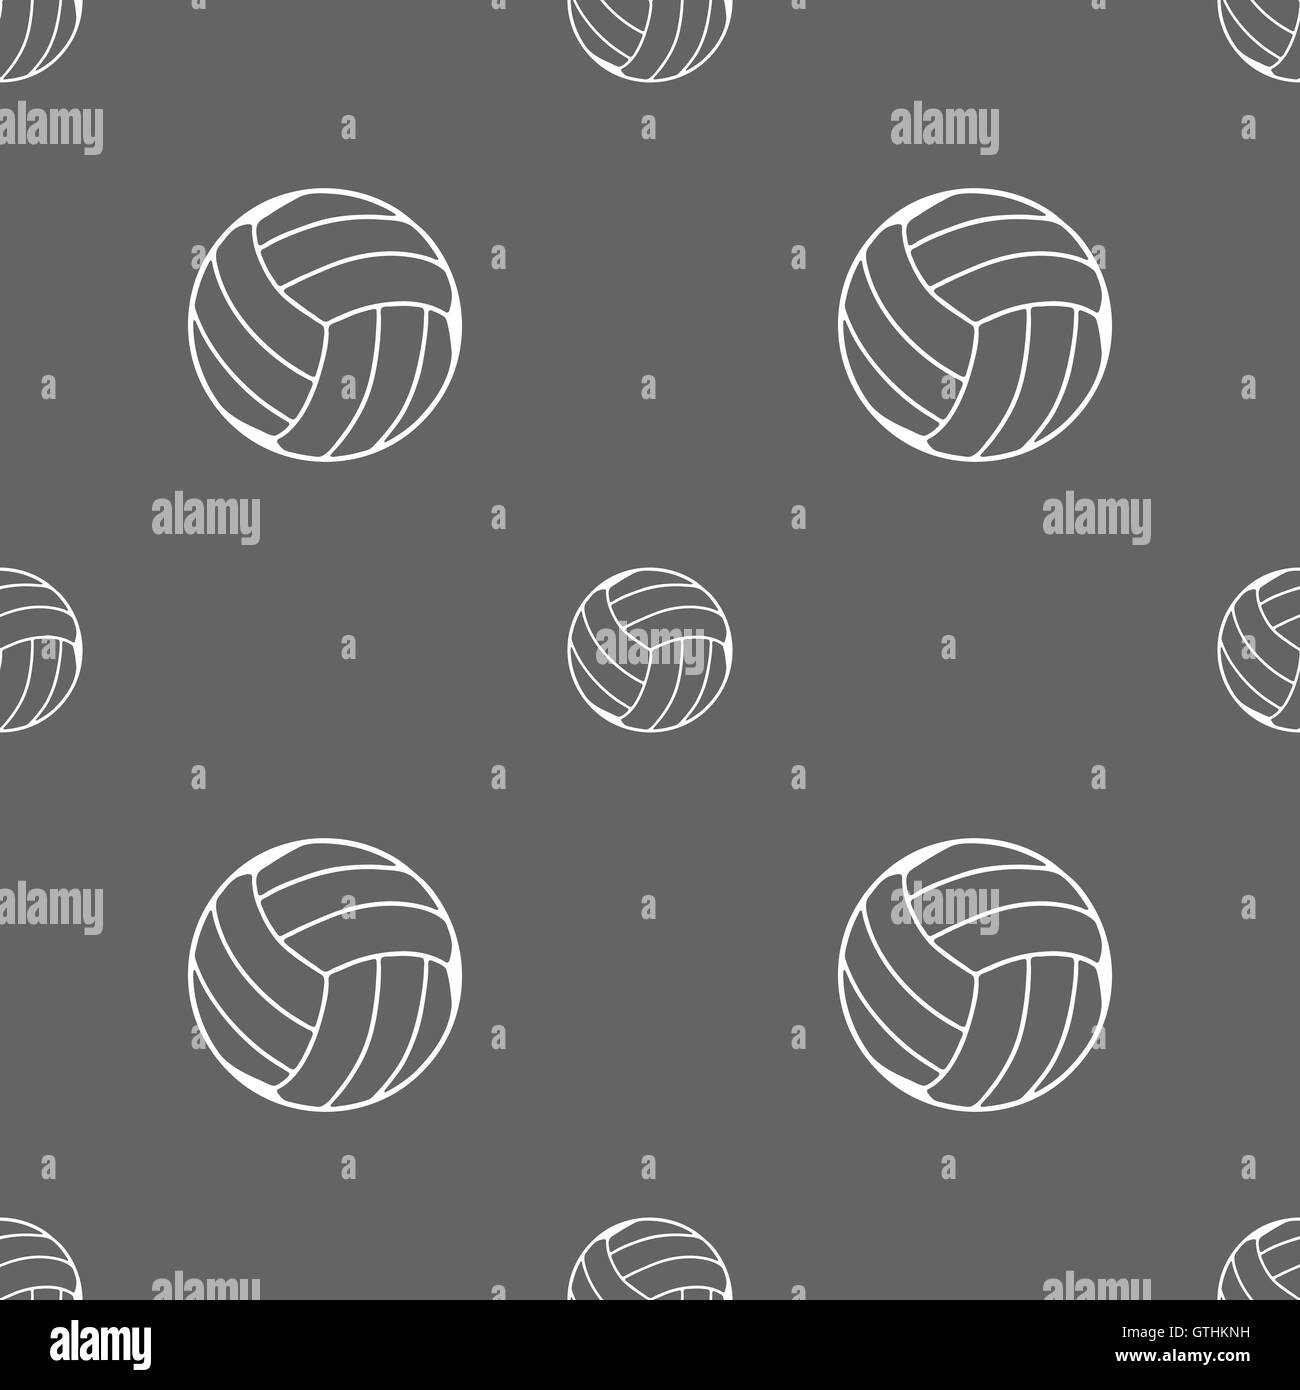 Seamless Sports Pattern: Volleyball Graphic by Glad Pants Crafts